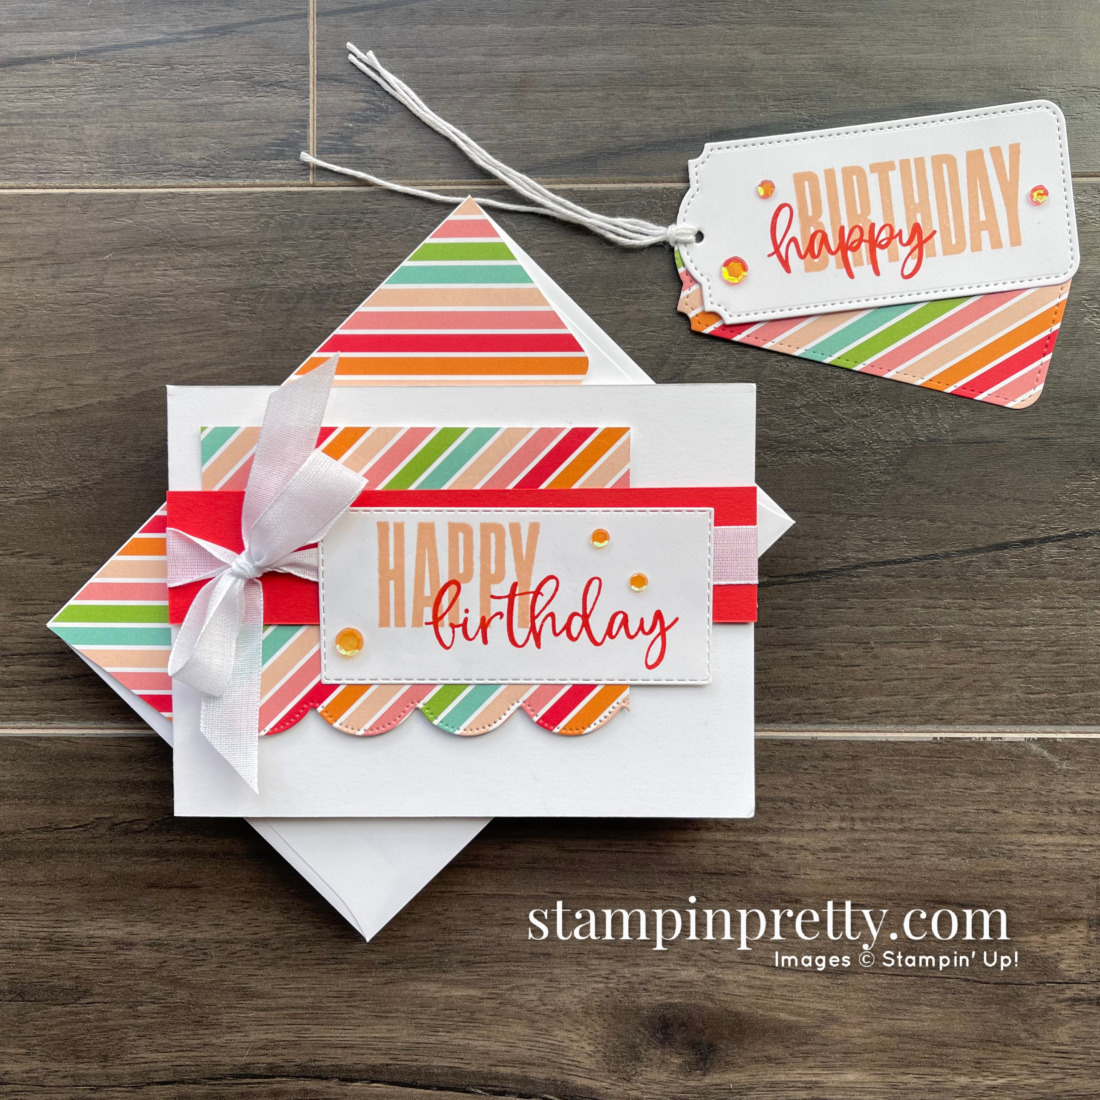 Stampin' Up! Check out the Birthday Card Organizer Kit!